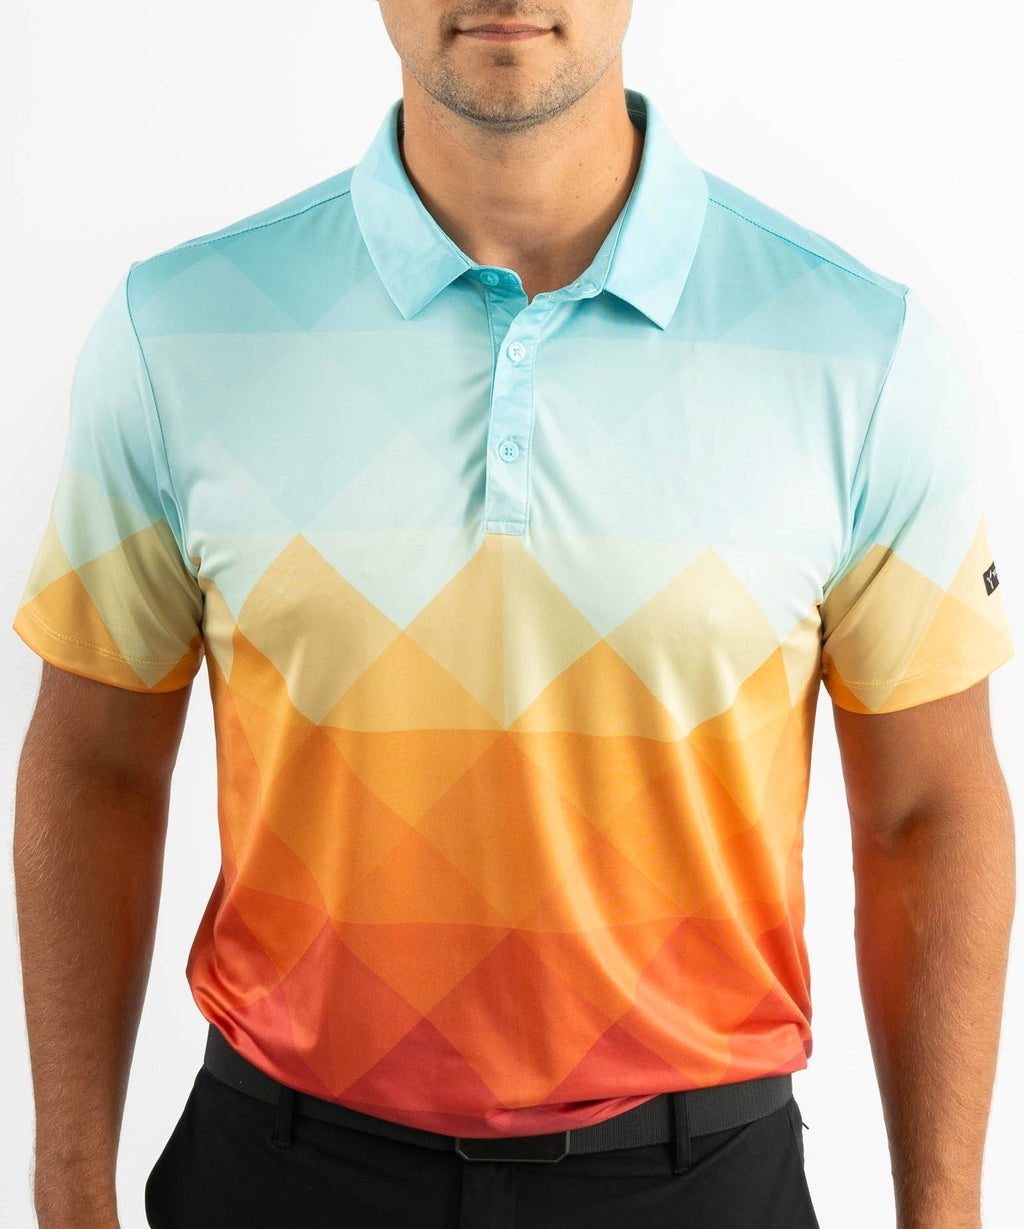 Best Selling Golf Shirts. Seriously Fantastic Polos. Only $39.95